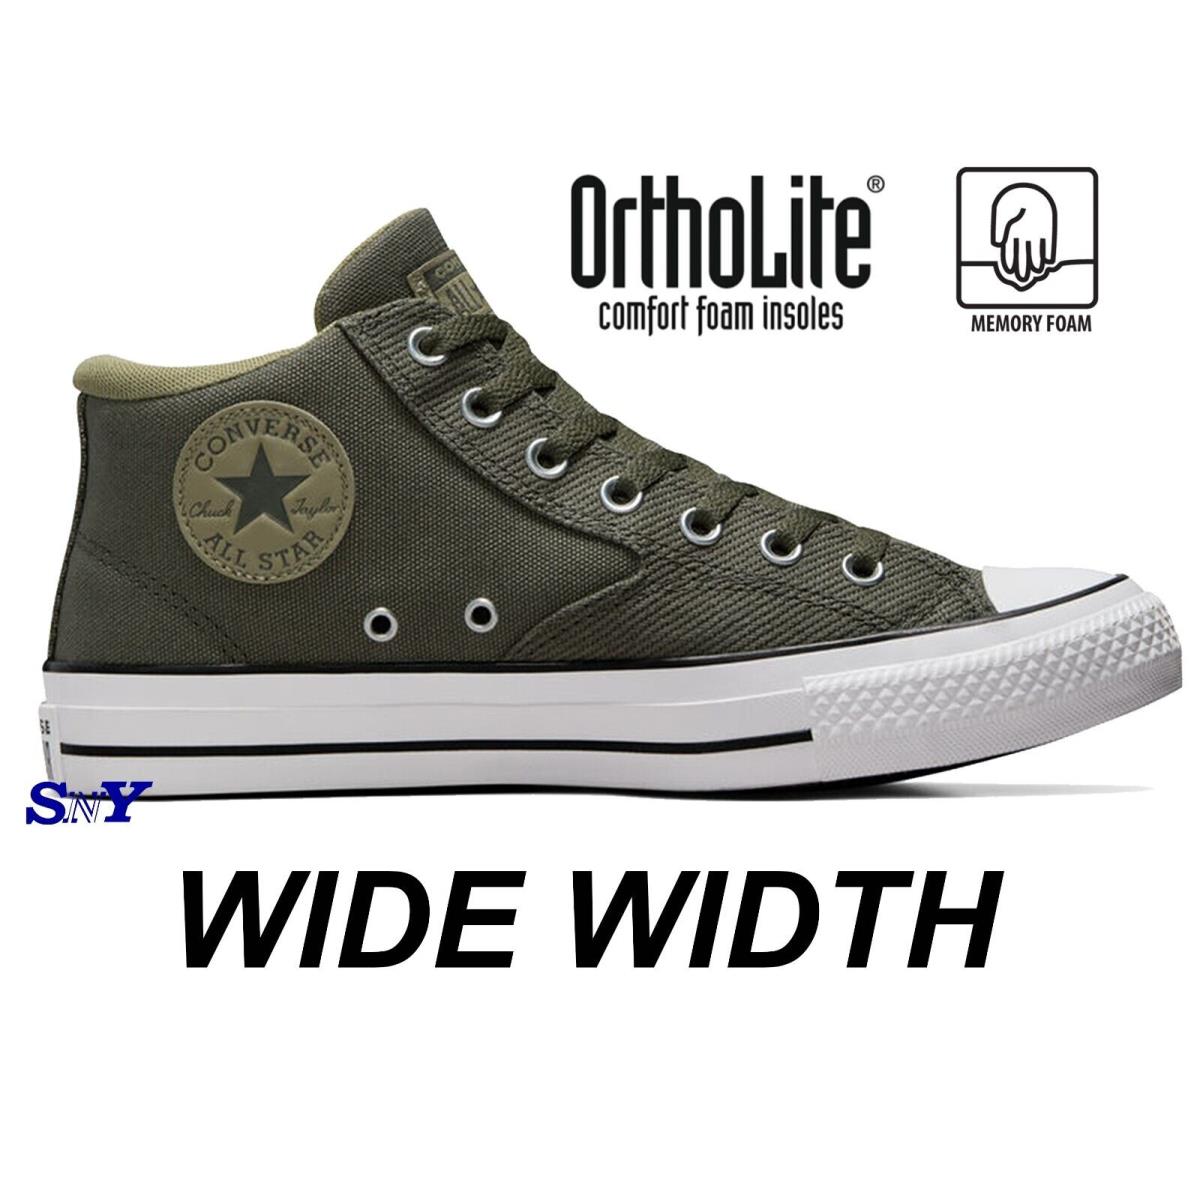 Converse Men`s Chuck Taylor All Star Malden Street Mid-top Shoes Wide Width - Cave Green/Mossy Sloth Green